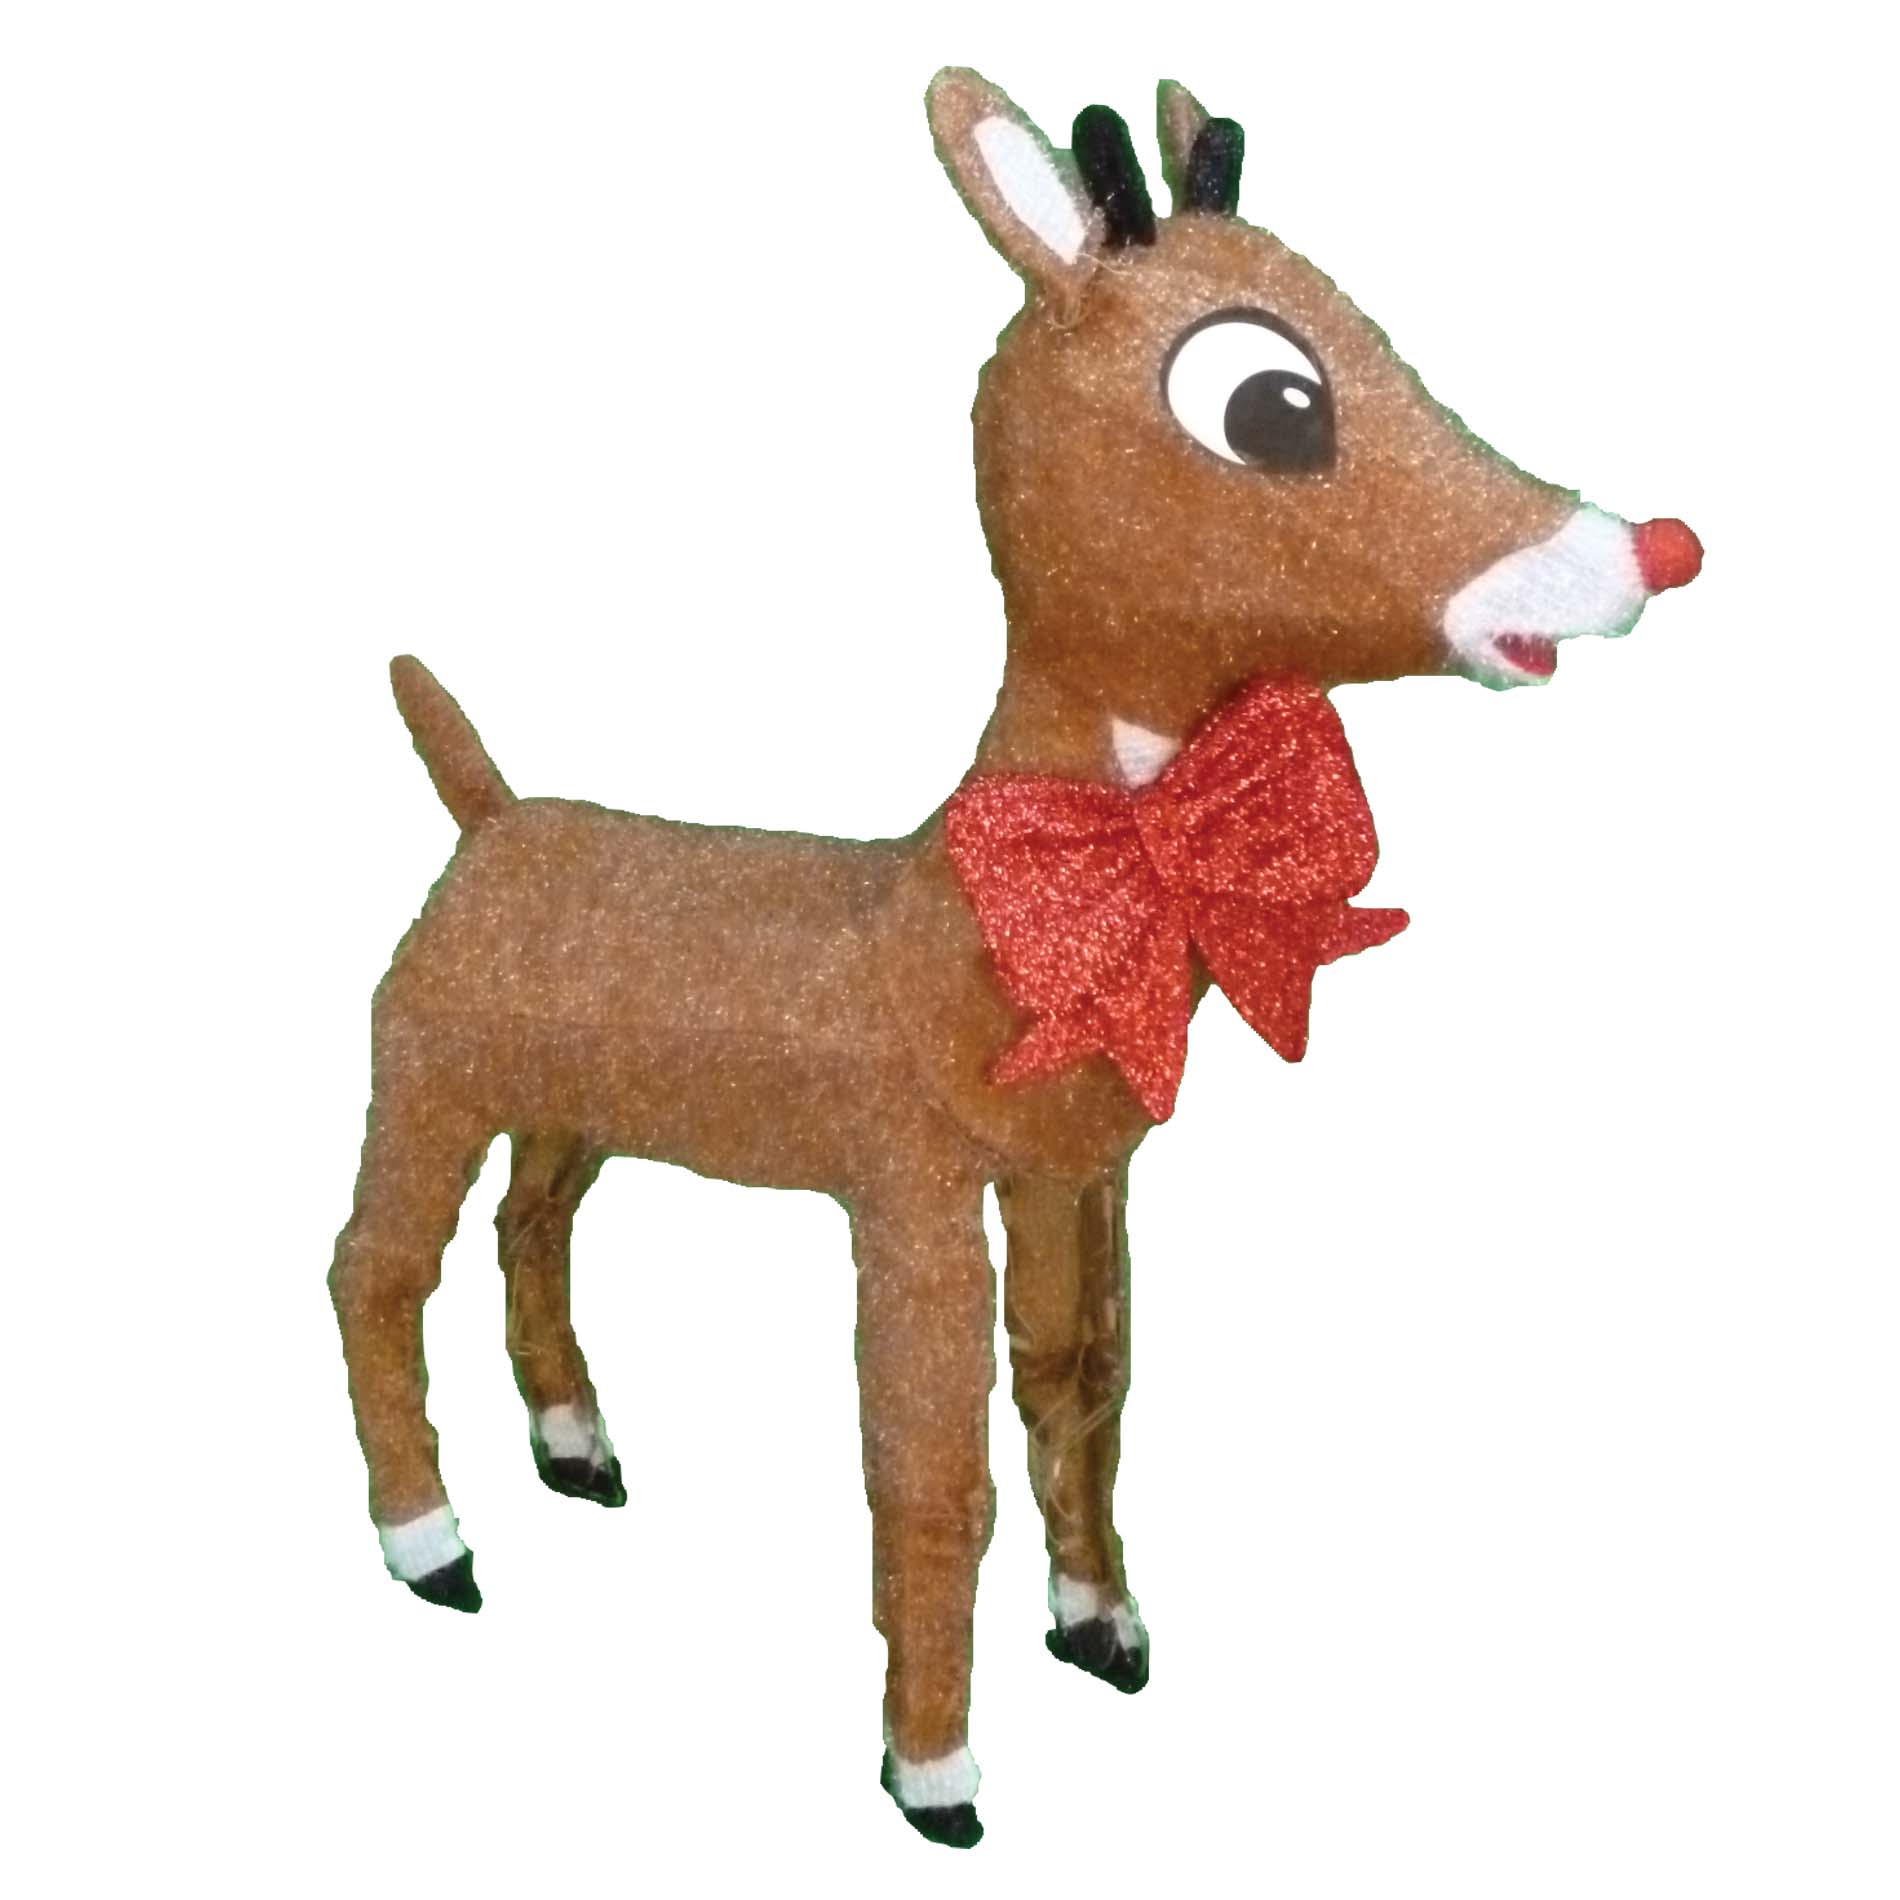 Rudolph the Red-Nosed Reindeer Lightup Rudolph Outdoor Christmas Decoration